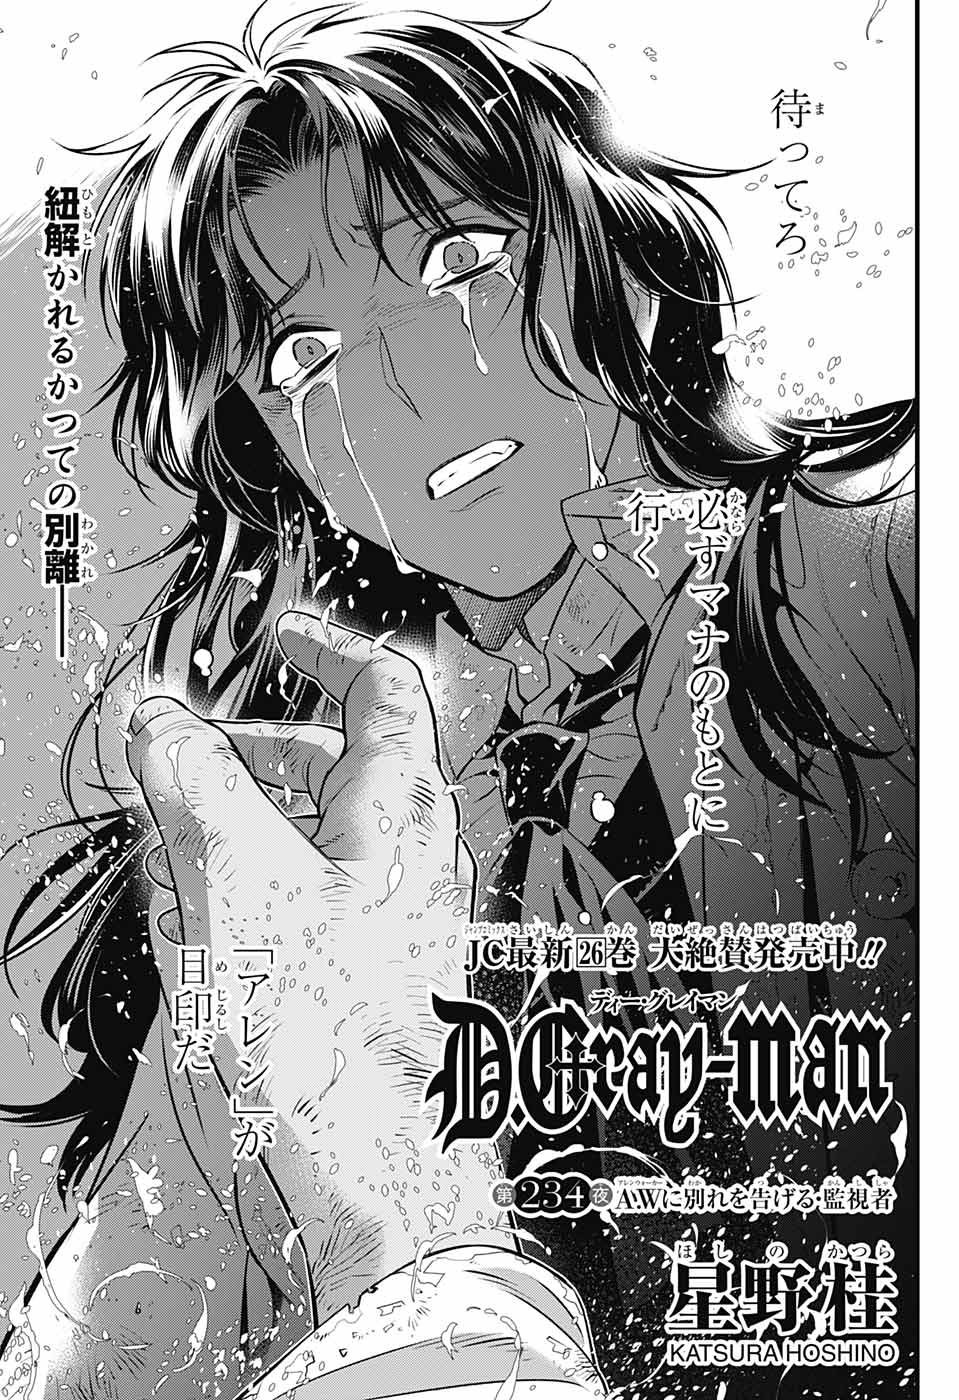 D Gray Man - Chapter 234 - Page 3